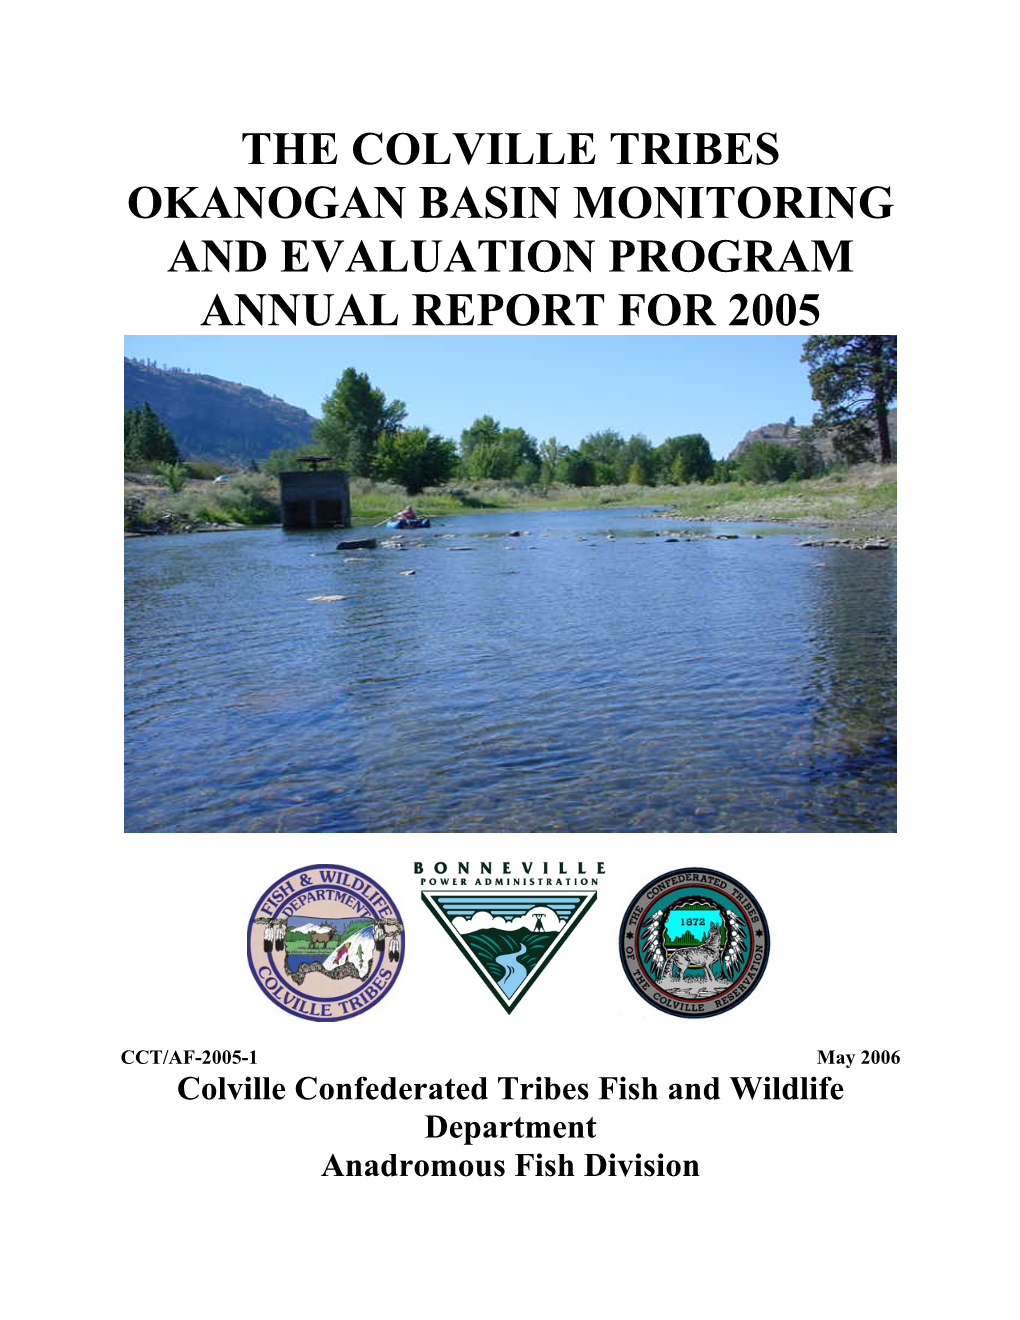 The Colville Tribes Okanogan Basin Monitoring and Evaluation Program Annual Report for 2005